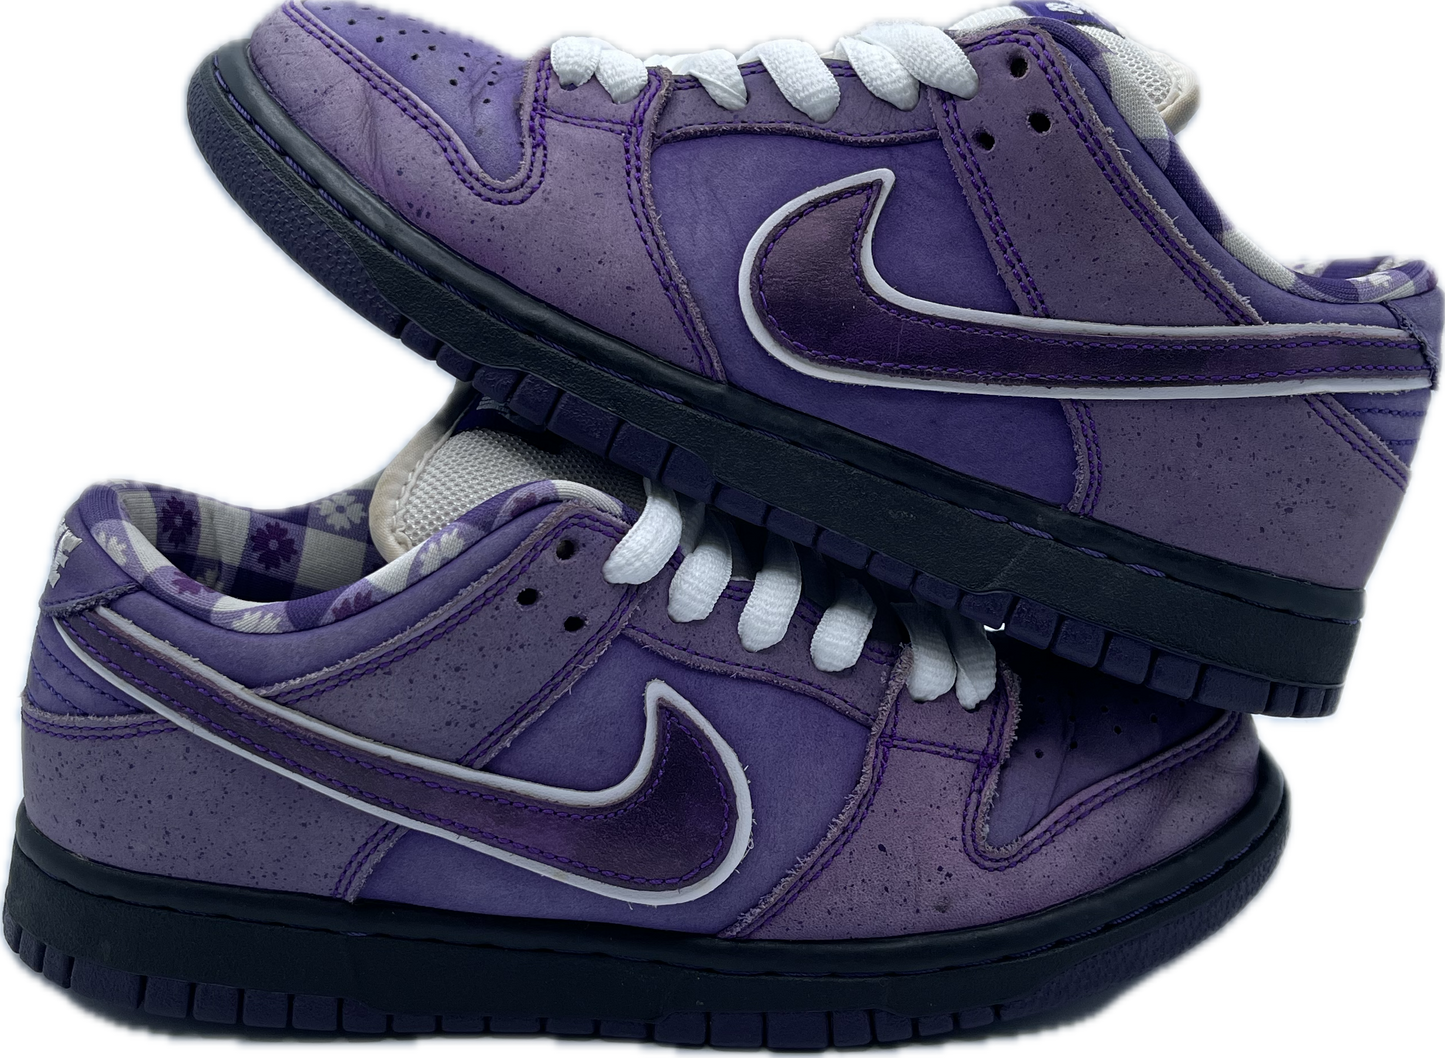 Dunk low SB Lobster Purple Concept Used